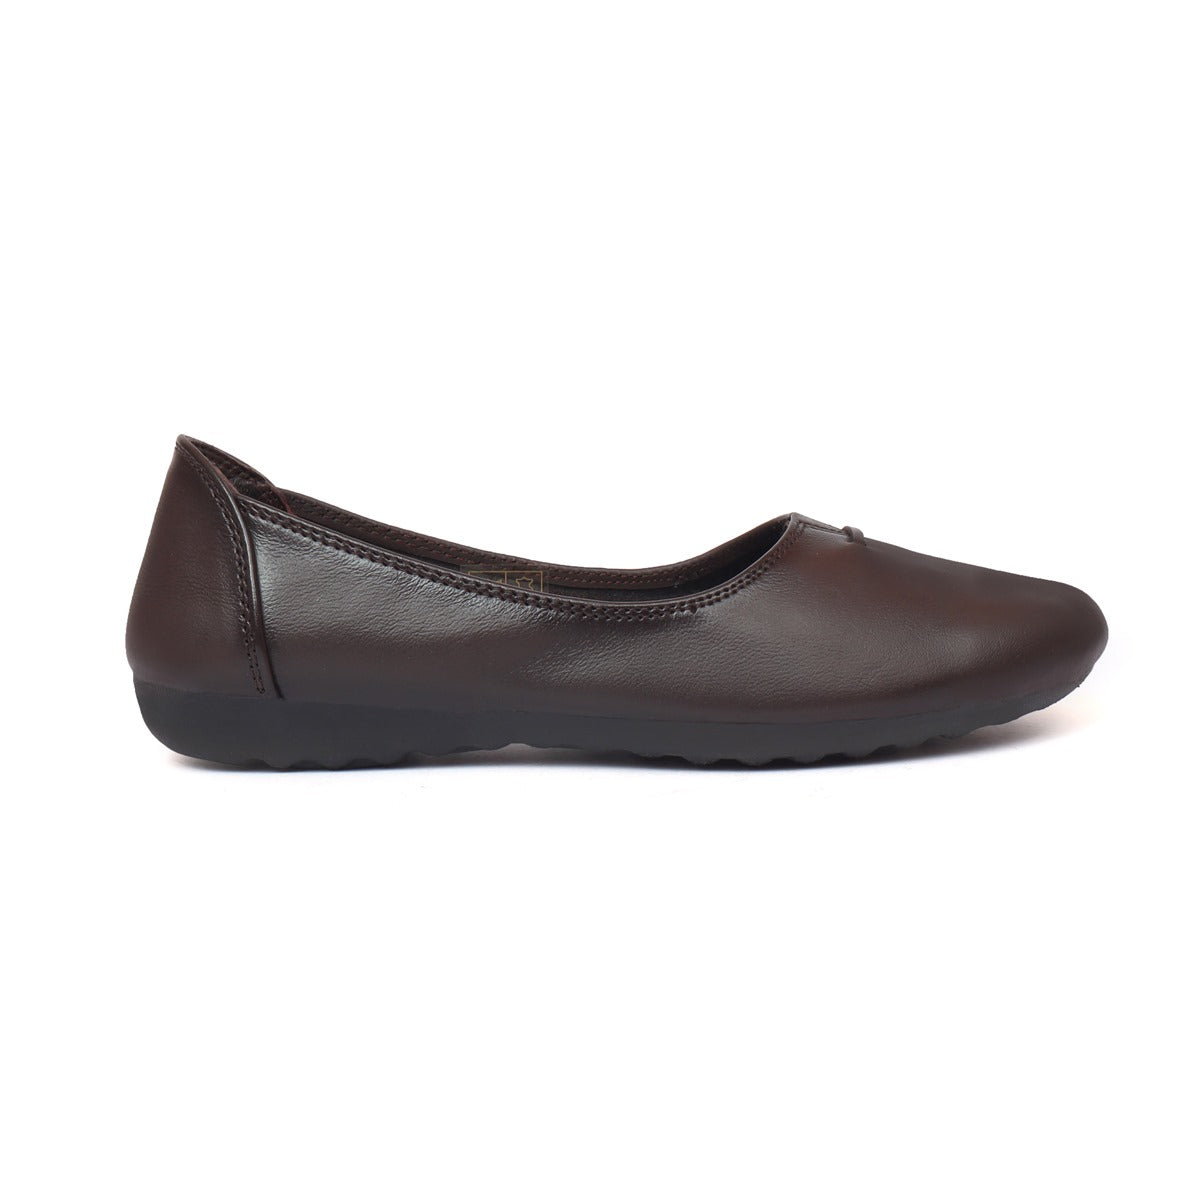 Bellies for women NV-111 brown_1